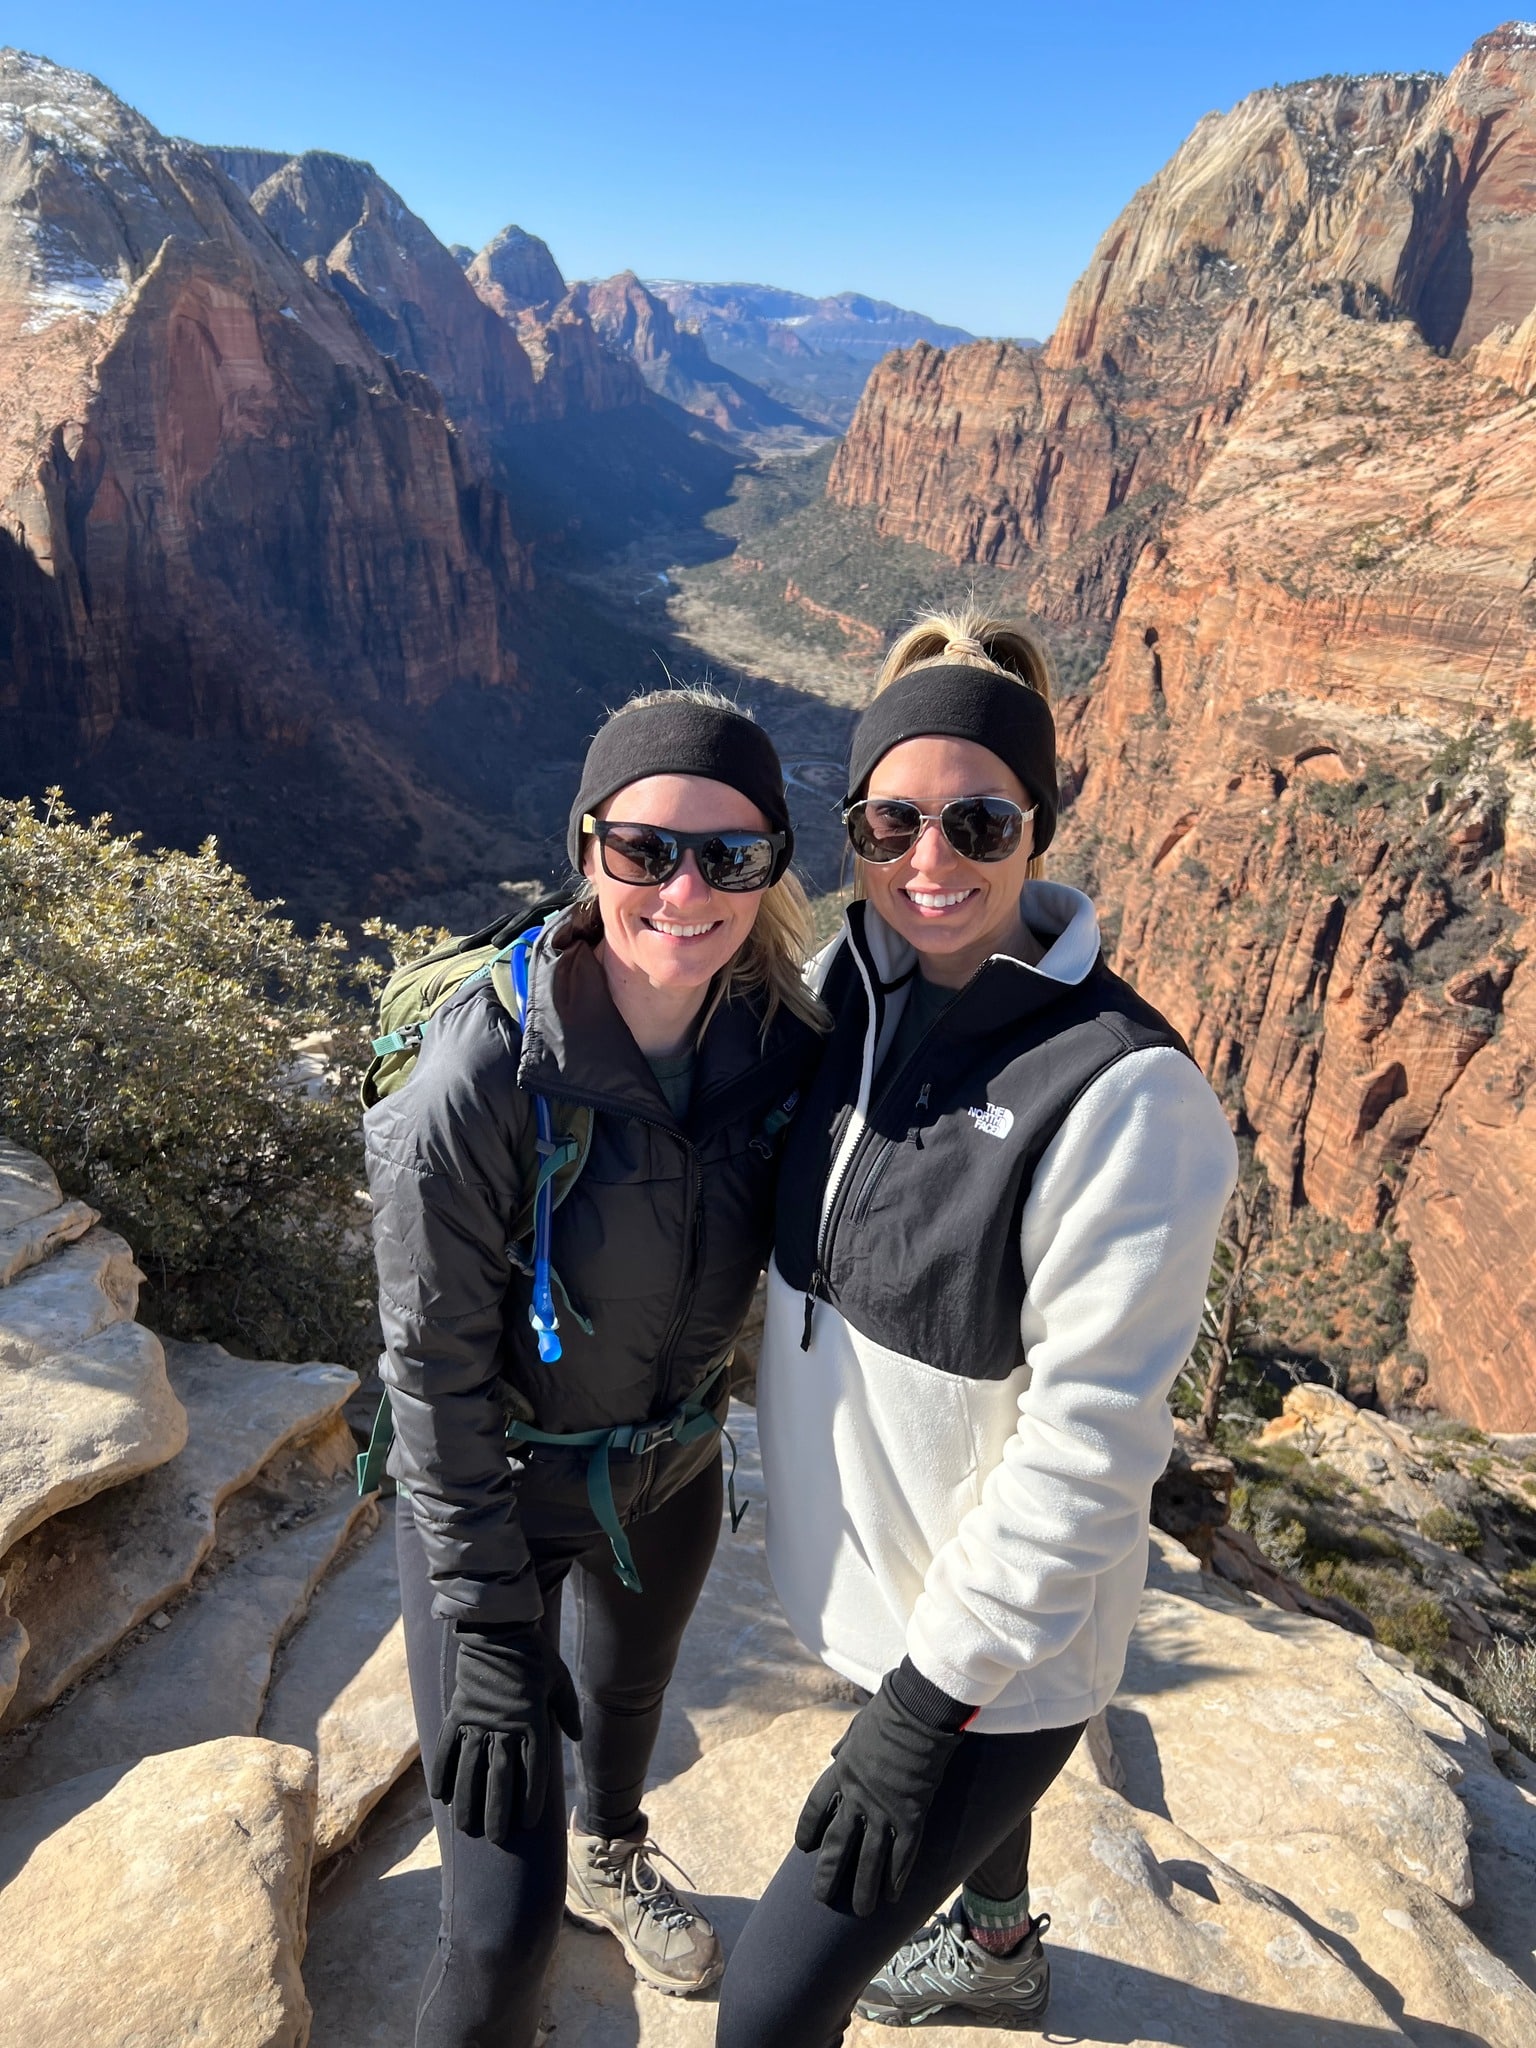 couple wearing jackets and gloves and sunglasses while hiking in a large canyon